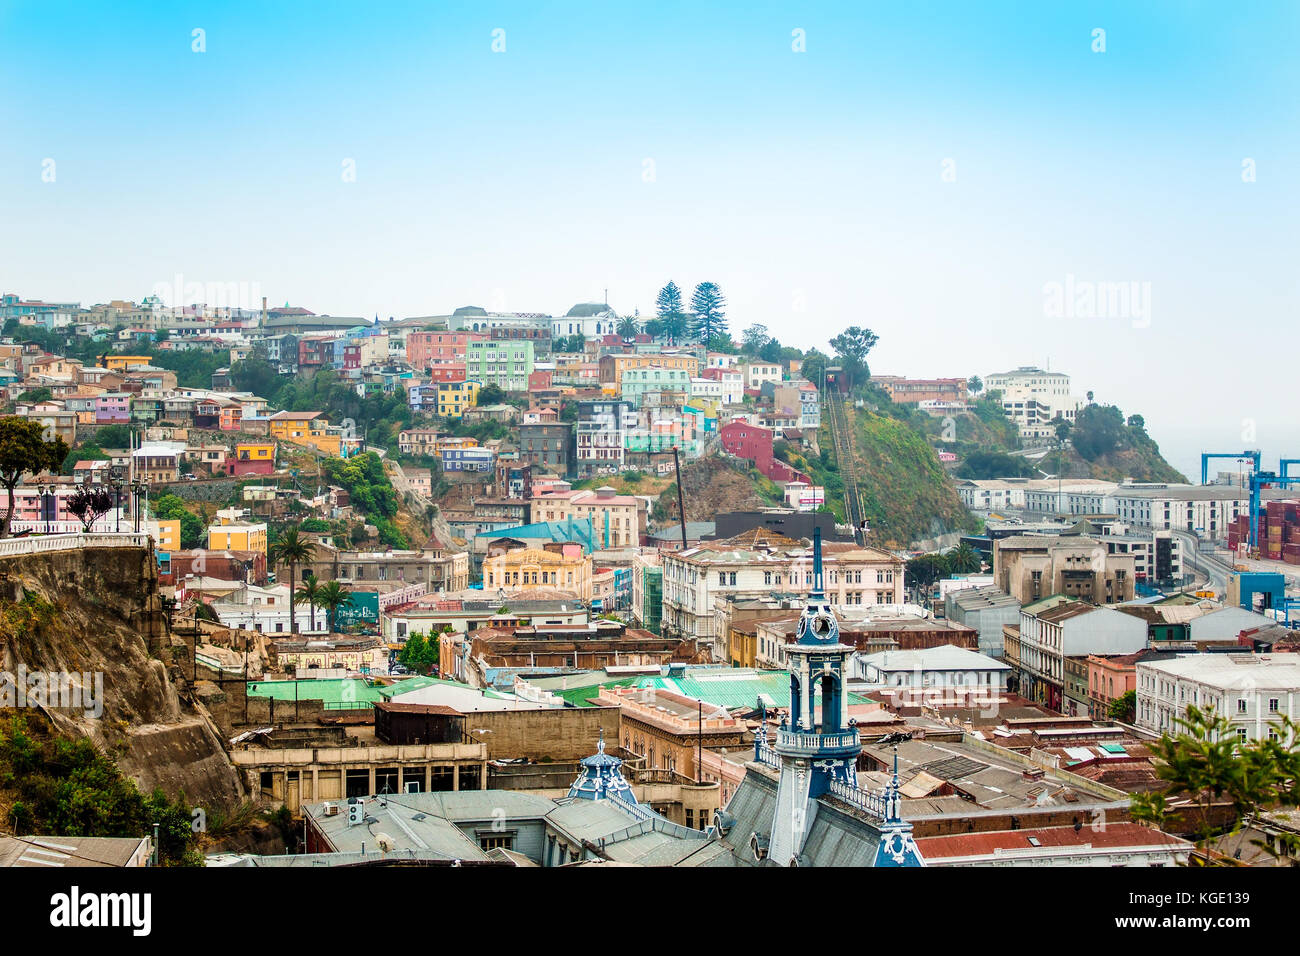 VALPARAISO, CHILE - OCTOBER 27, 2016: View of city center of Valparaiso form hill. Valparaiso is very picturesque city and famous as a UNESCO World He Stock Photo